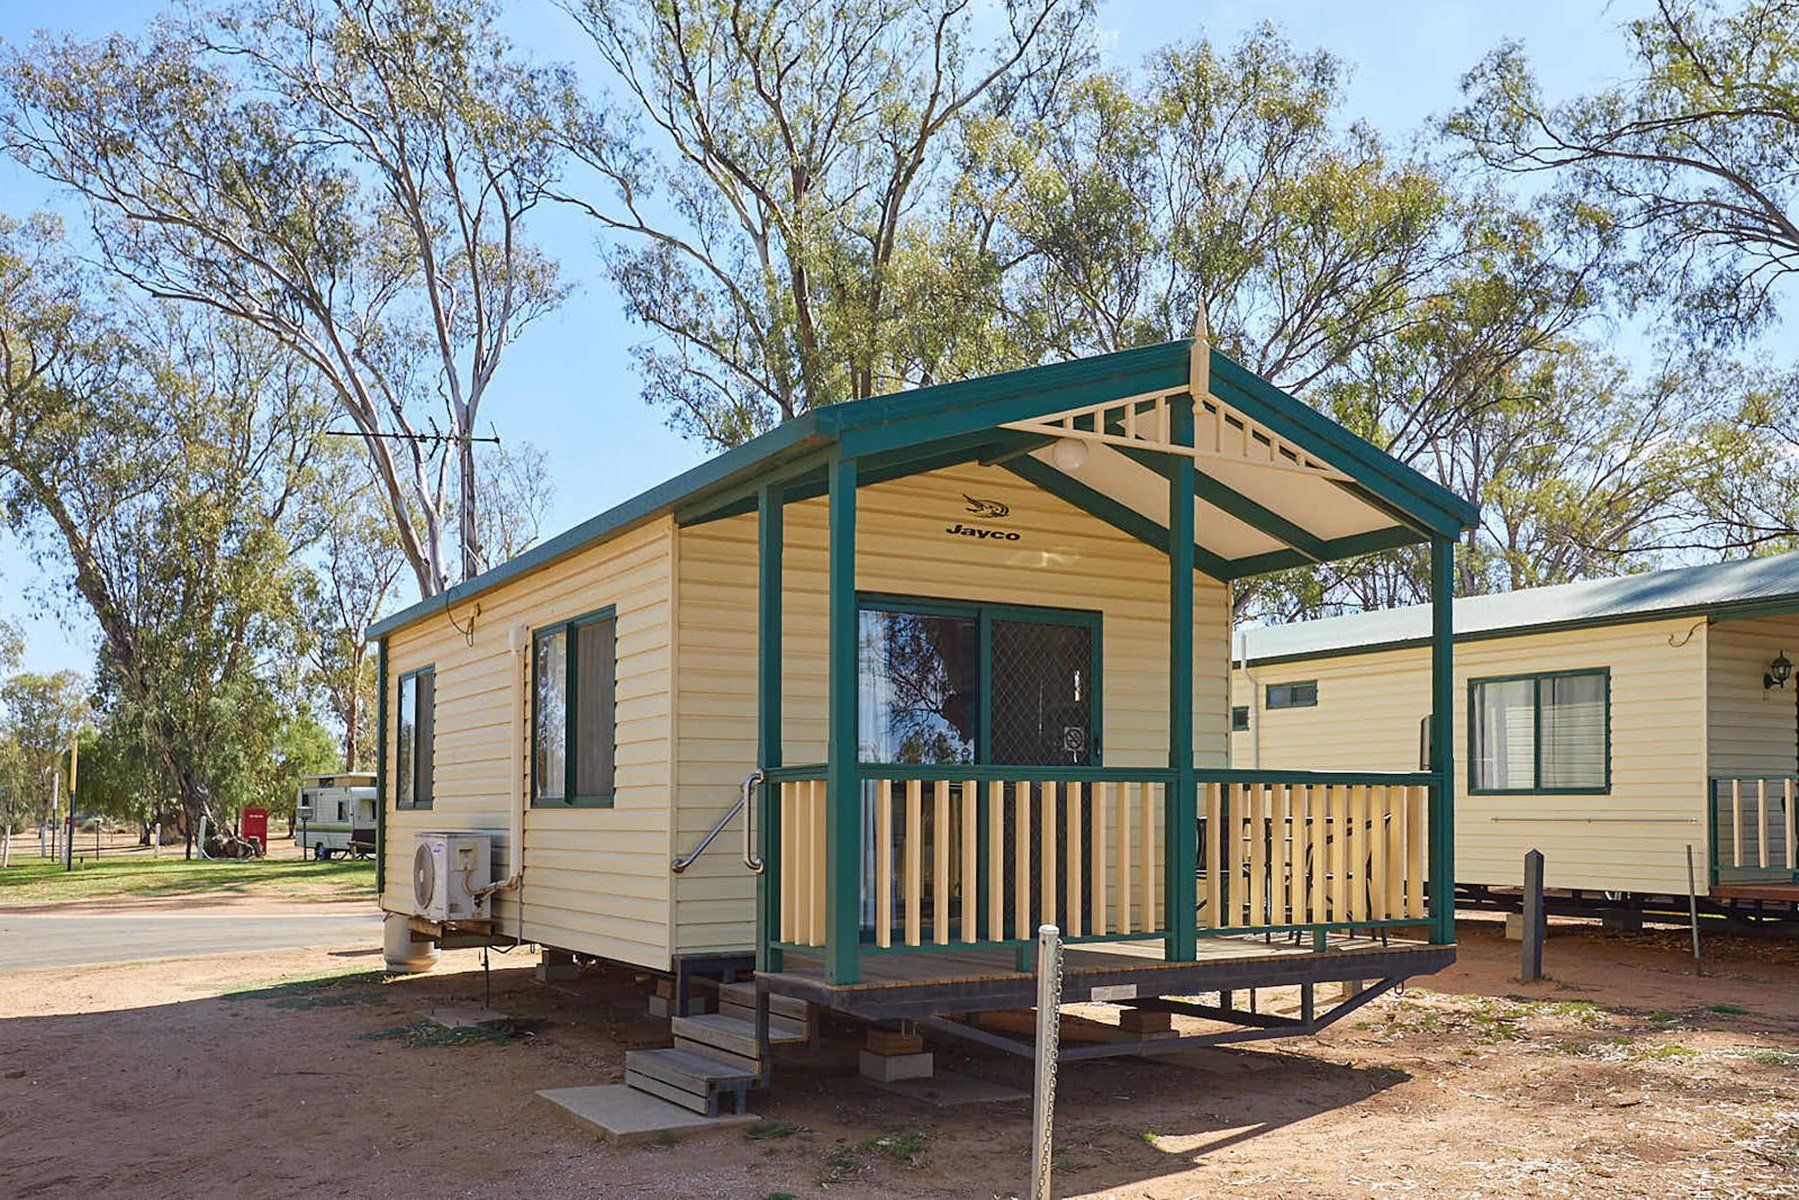 Apex Riverbeach Holiday Park cabin's with a front deck overlooking river beach and trees in the background .